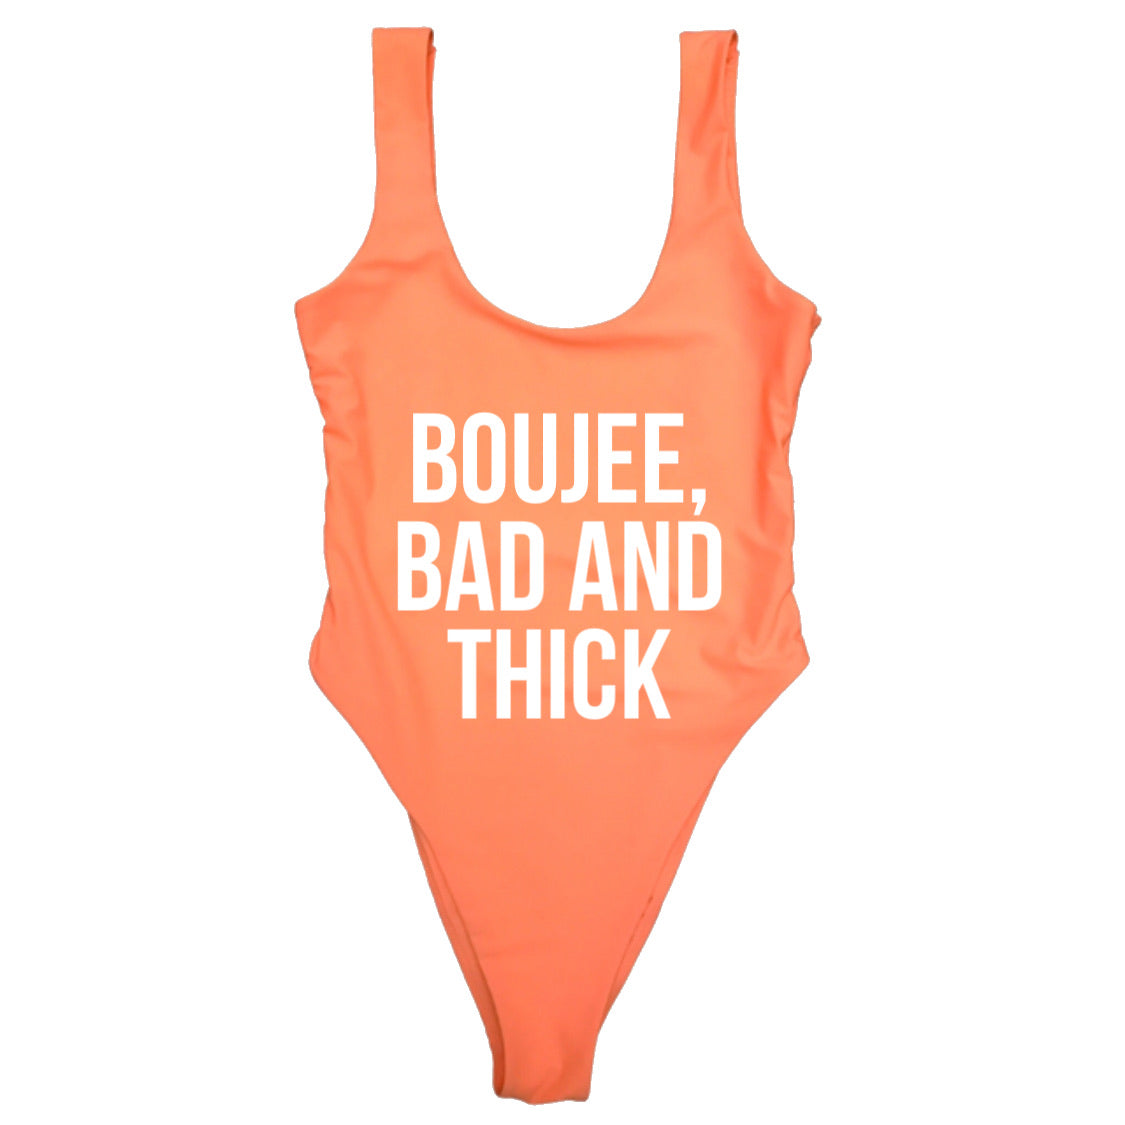 BOUJEE, BAD AND THICK